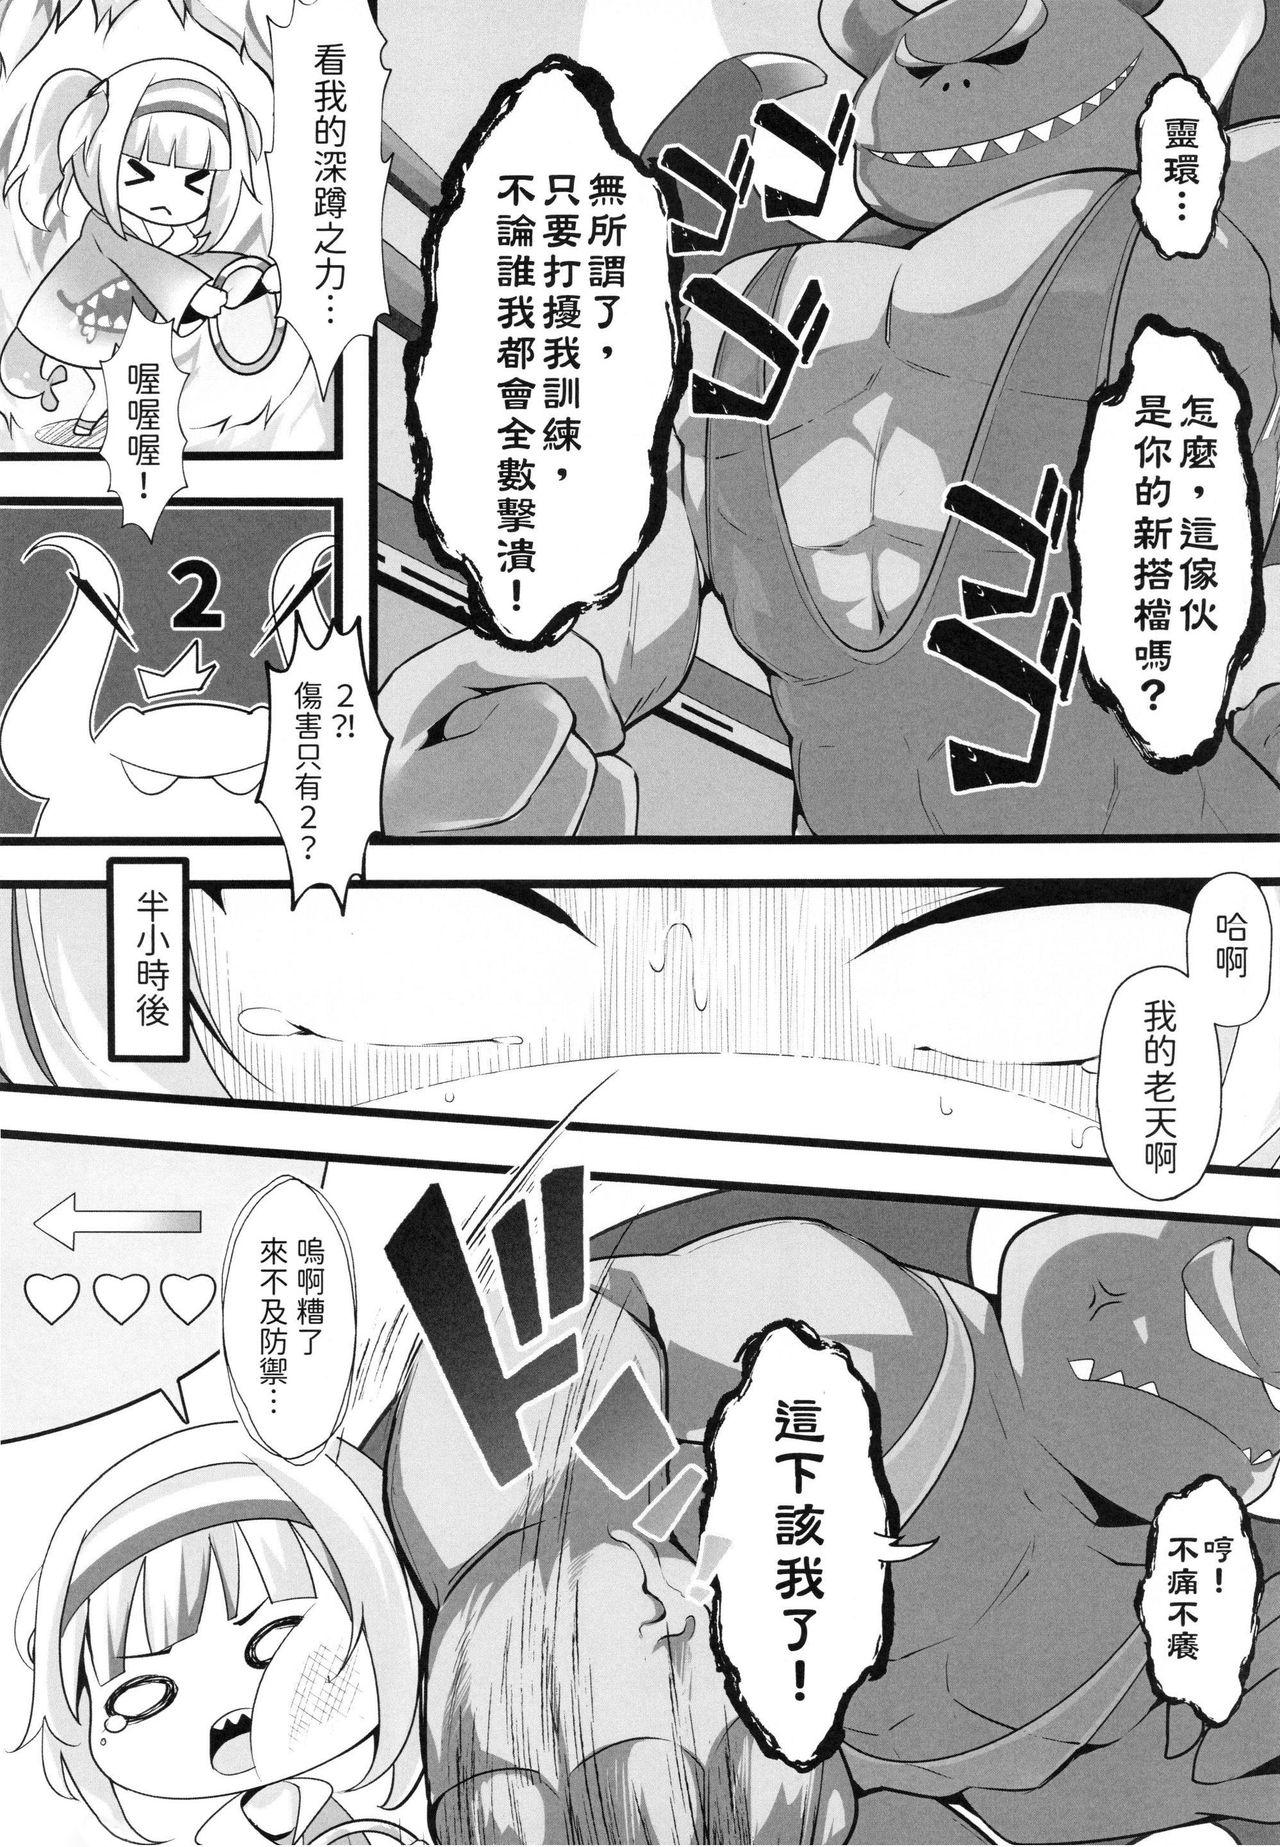 Stepbrother 【台灣FF37】[ちやみ] Let's Sweat (hololive) (Gawr Gura) (Vtuber) [Chinese] [Decensored] - Hololive Ring fit adventure Gritona - Page 5